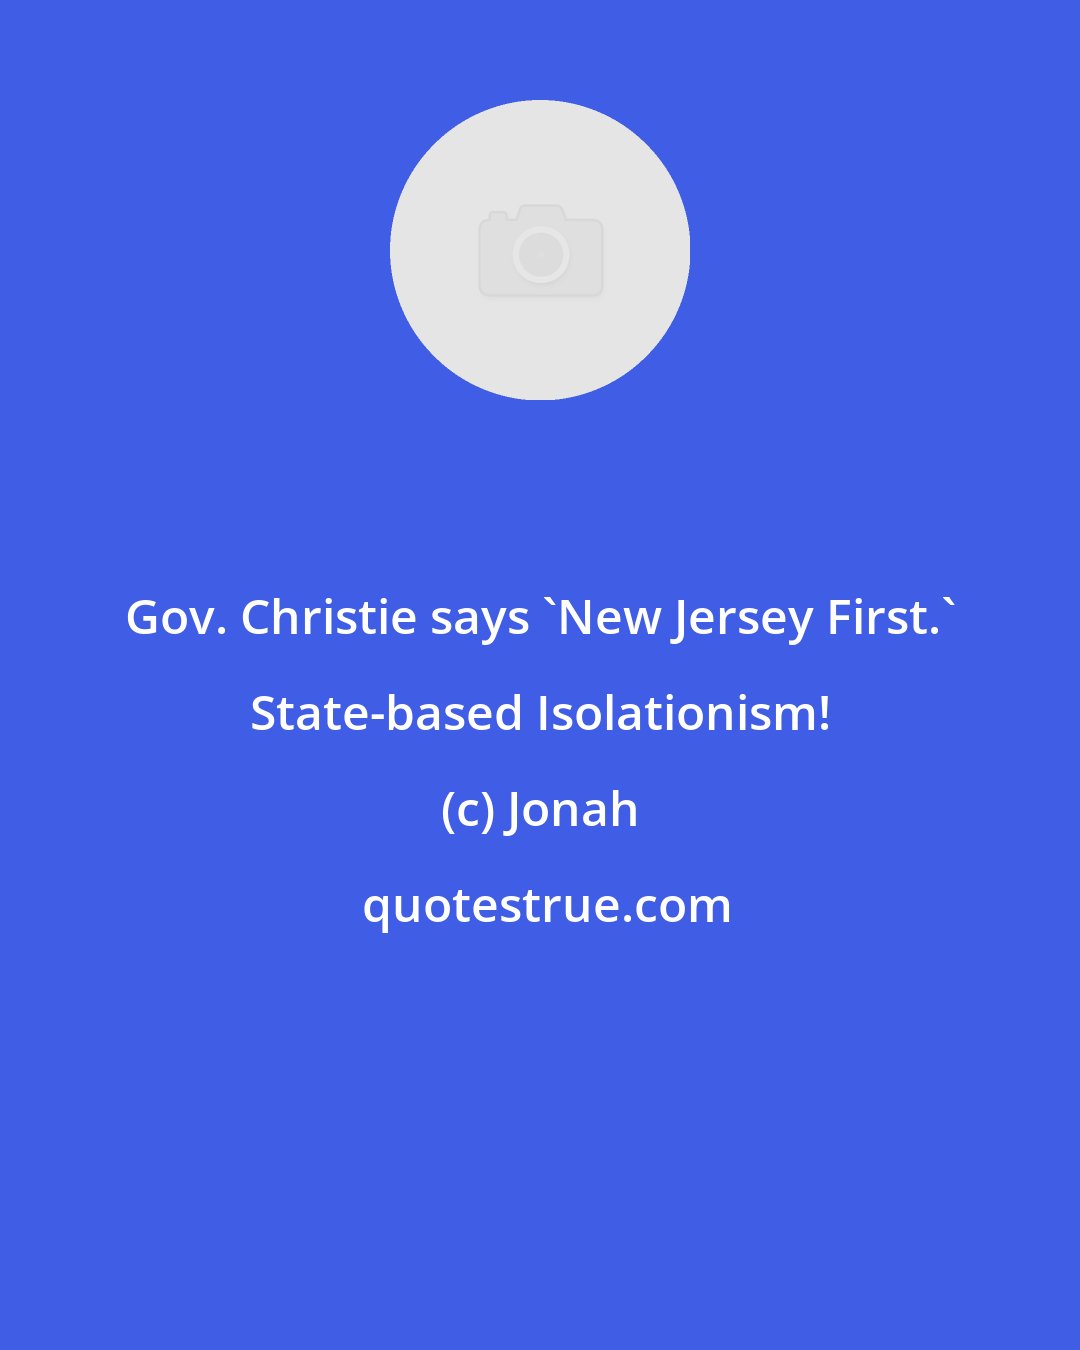 Jonah: Gov. Christie says 'New Jersey First.' State-based Isolationism!